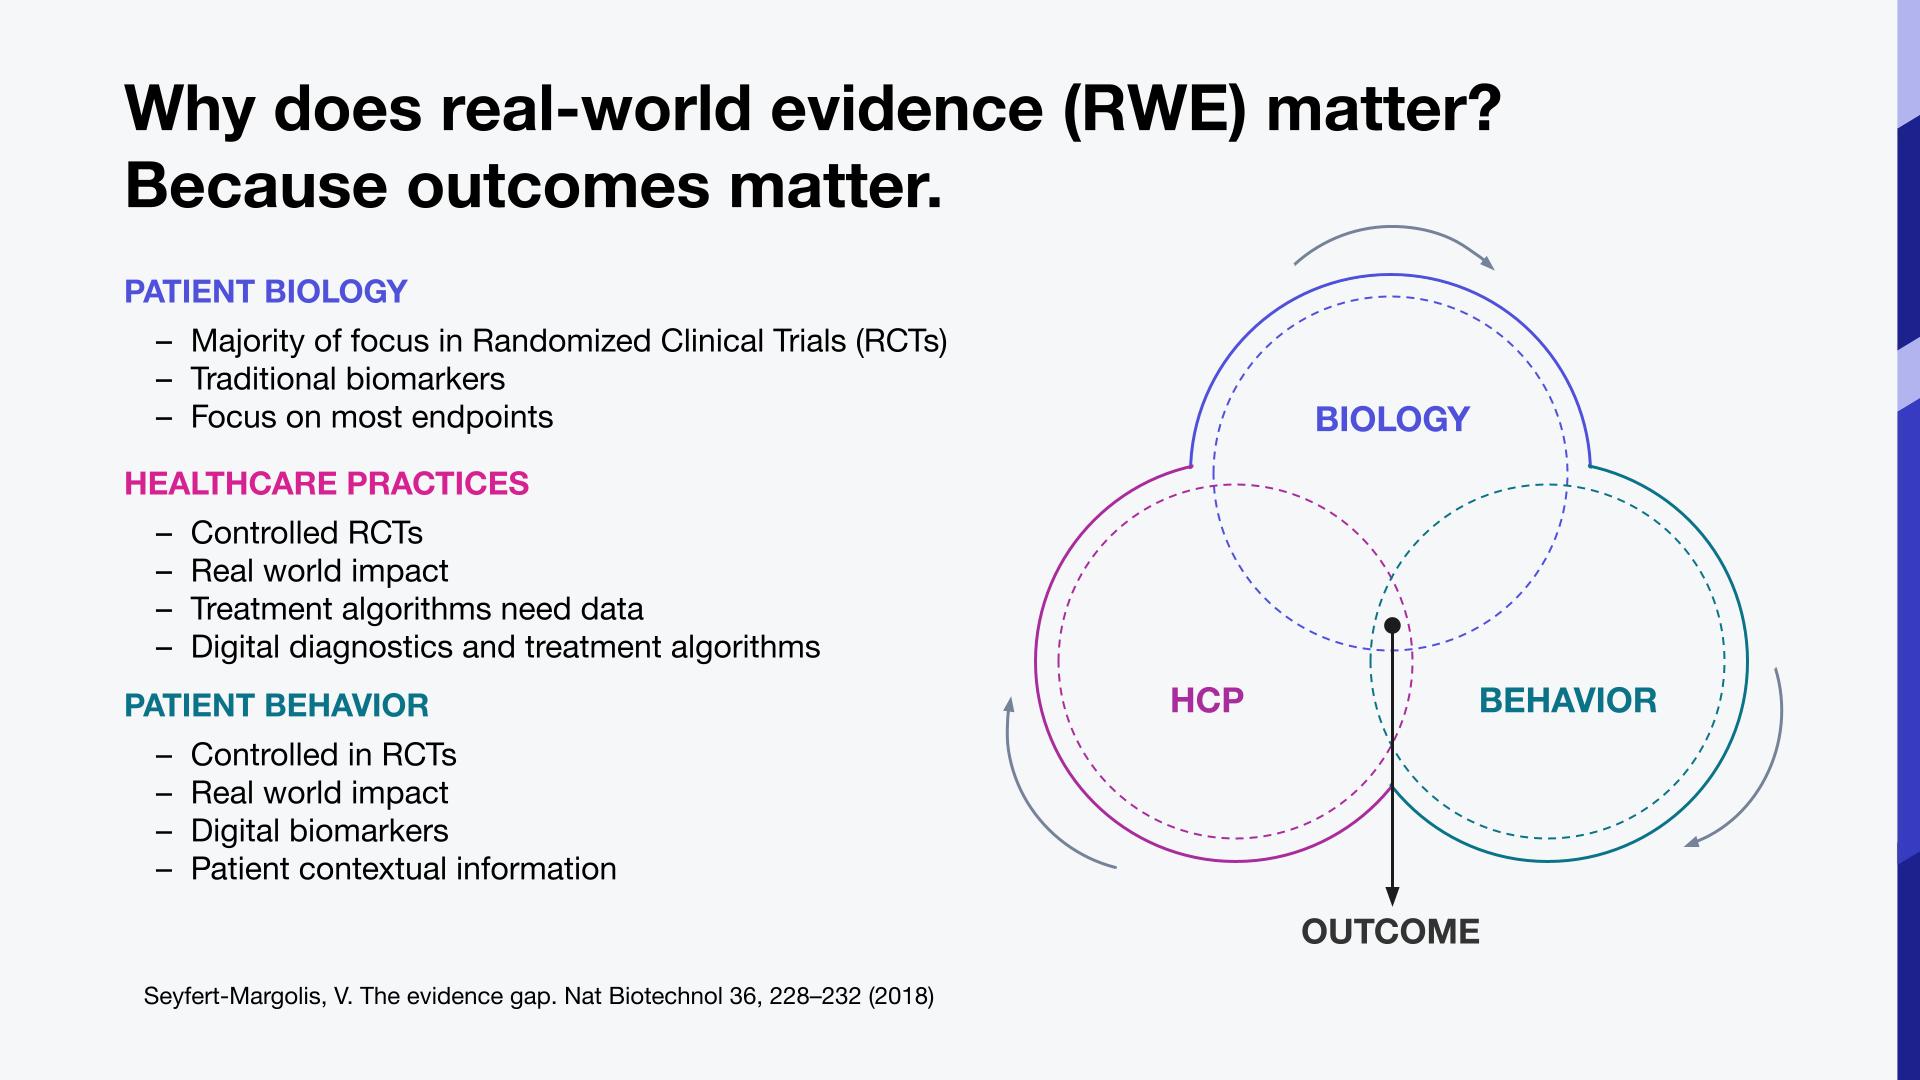 why does real-world evidence matter